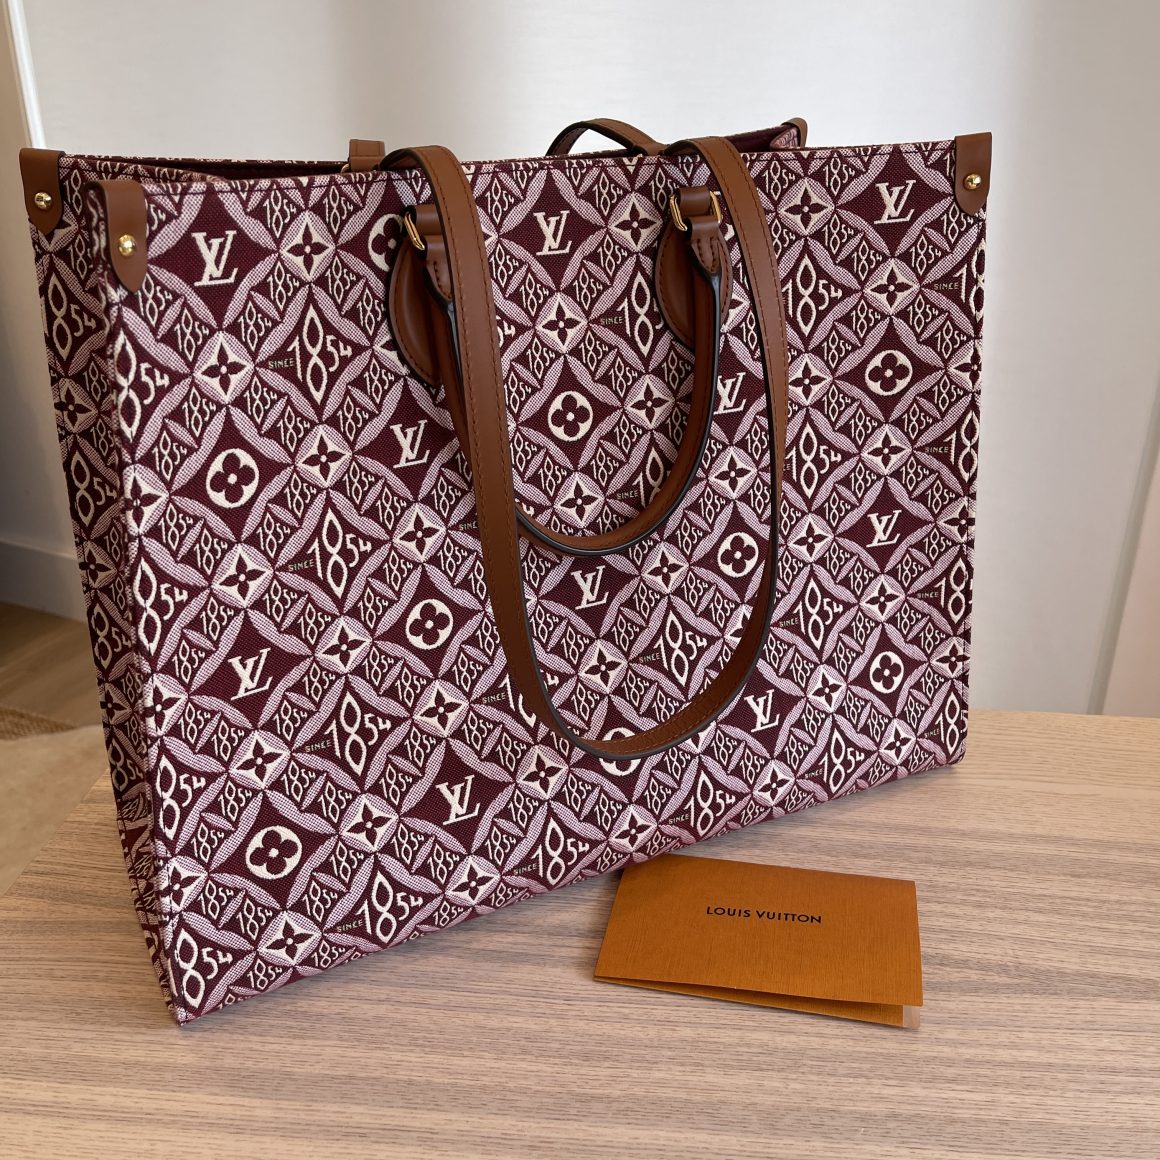 Louis Vuitton OnTheGo Tote Limited Edition Since 1854 Monogram Jacquard GM  - ShopStyle